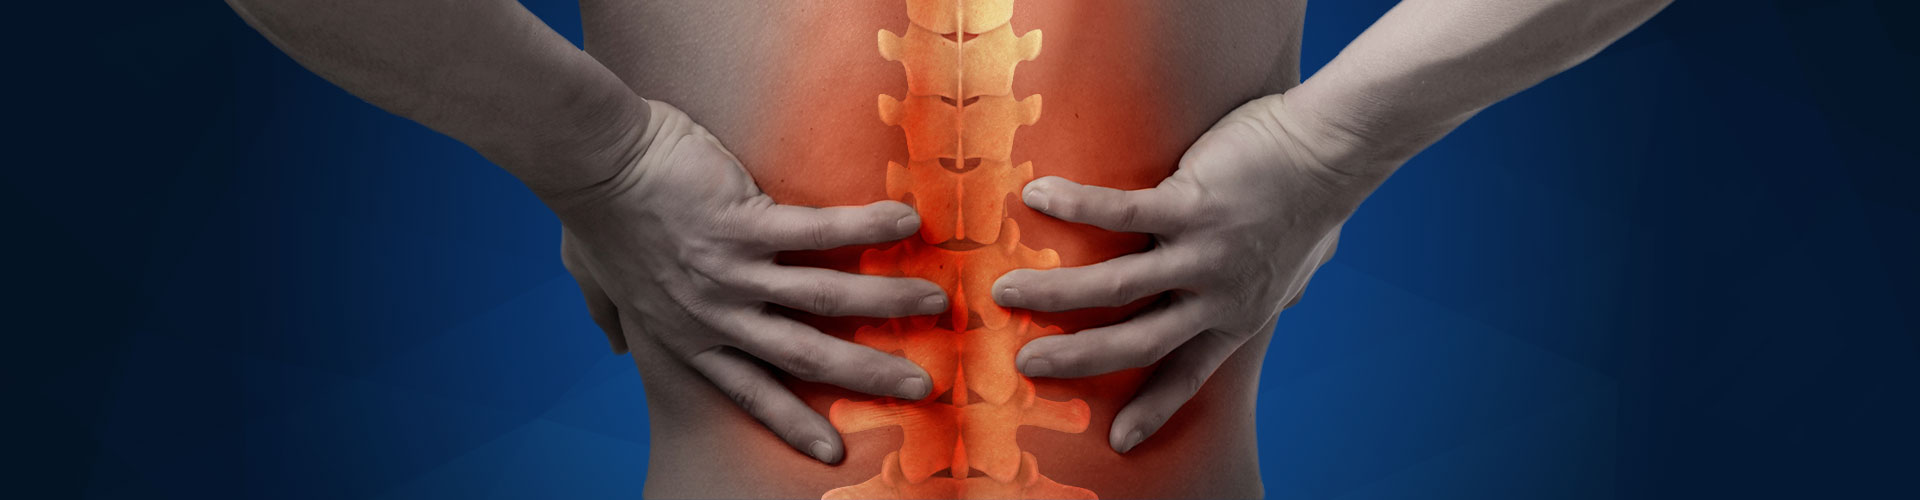 Back and Neck Pain Treatment Madison Wisconsin